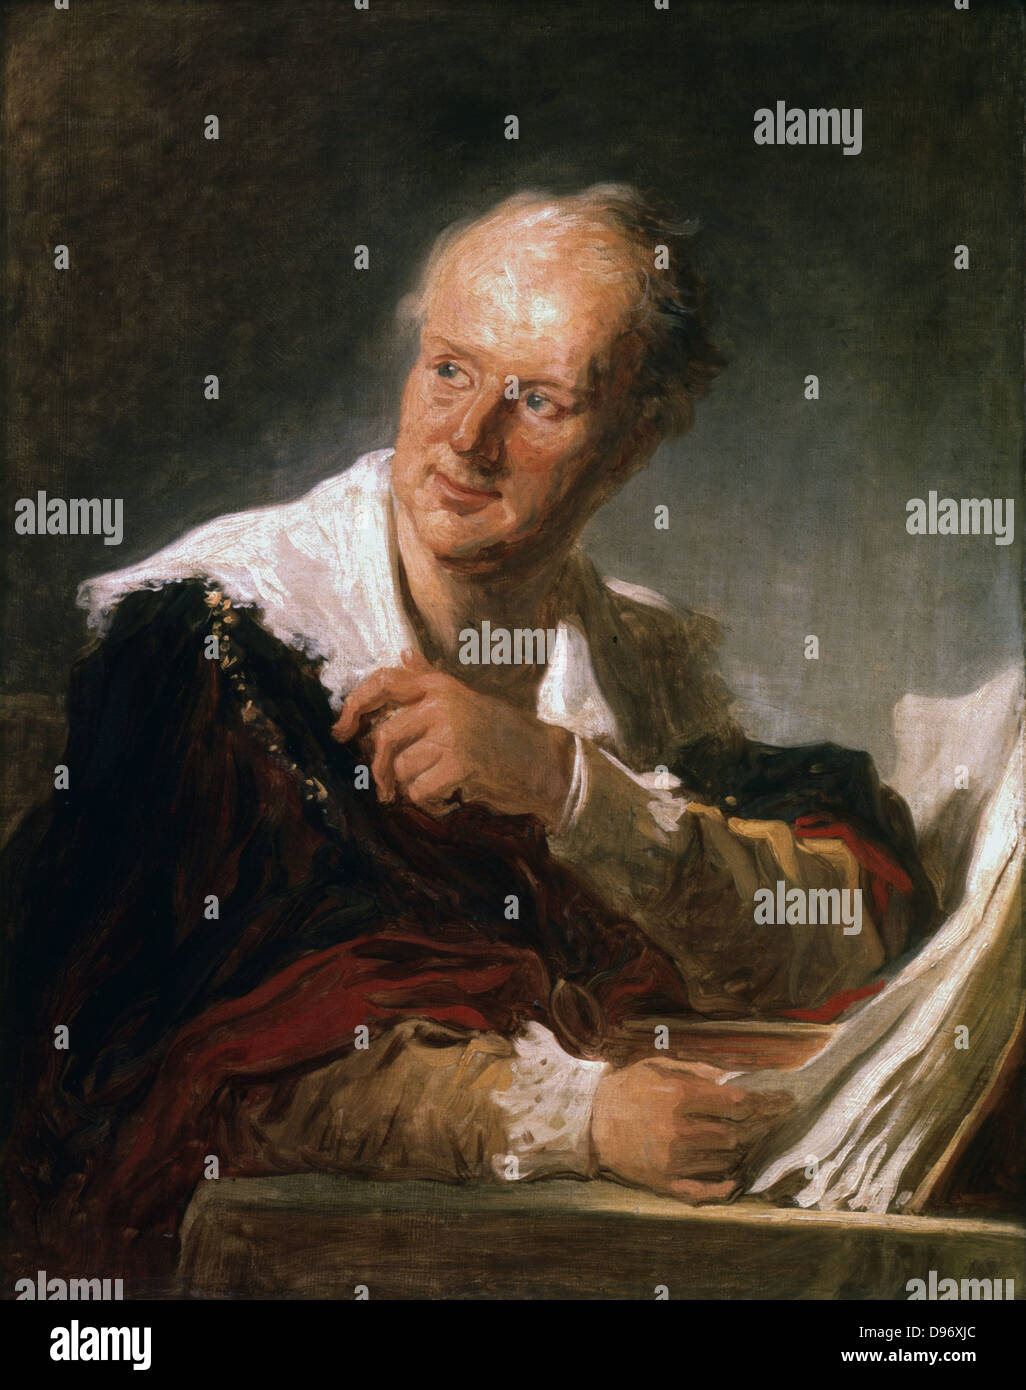 Denis Diderot (1713-1784) French man of letters and encyclopaedist. Portrait by Jean Honore Fragonard (1732-1806) Oil on canvas. Stock Photo